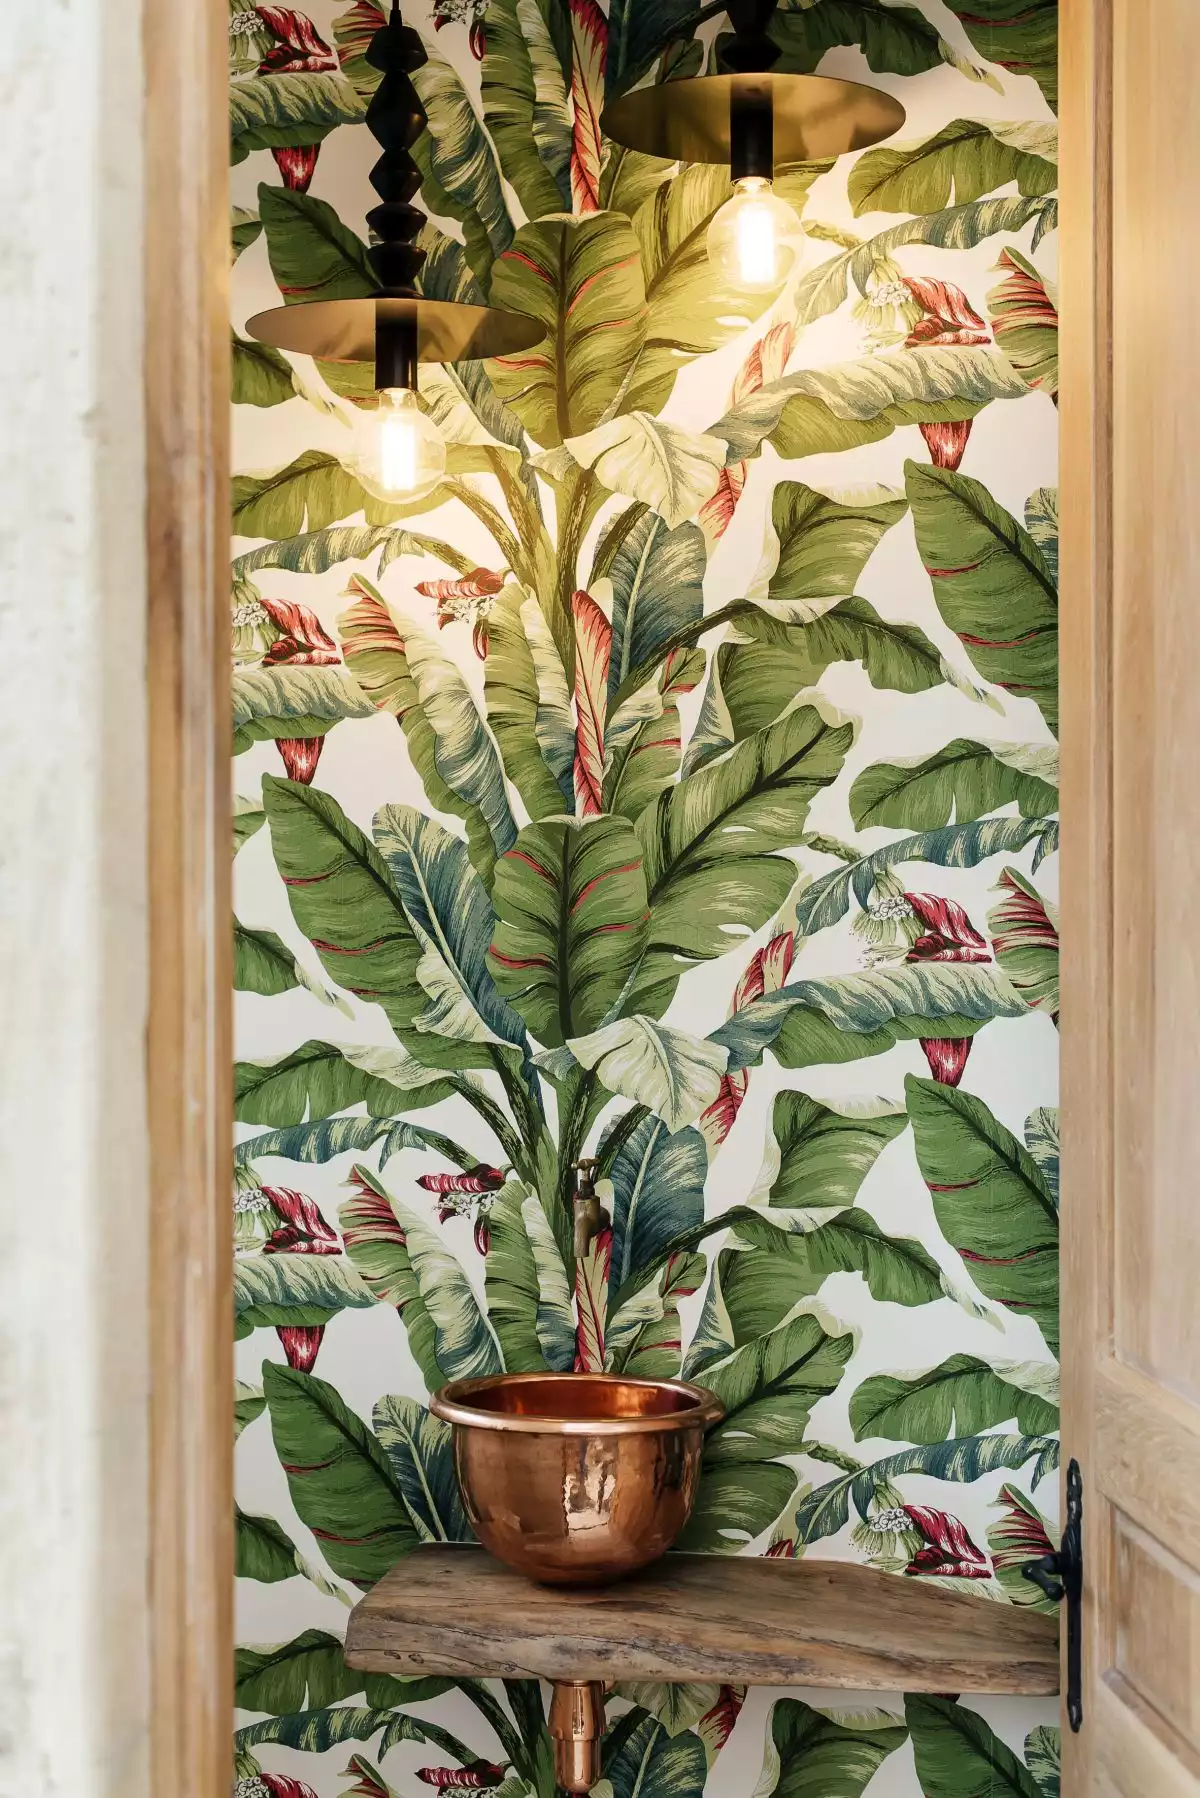 A variety of indoor plants complemented by themed artwork give the house a fresh, nature-infused vibe